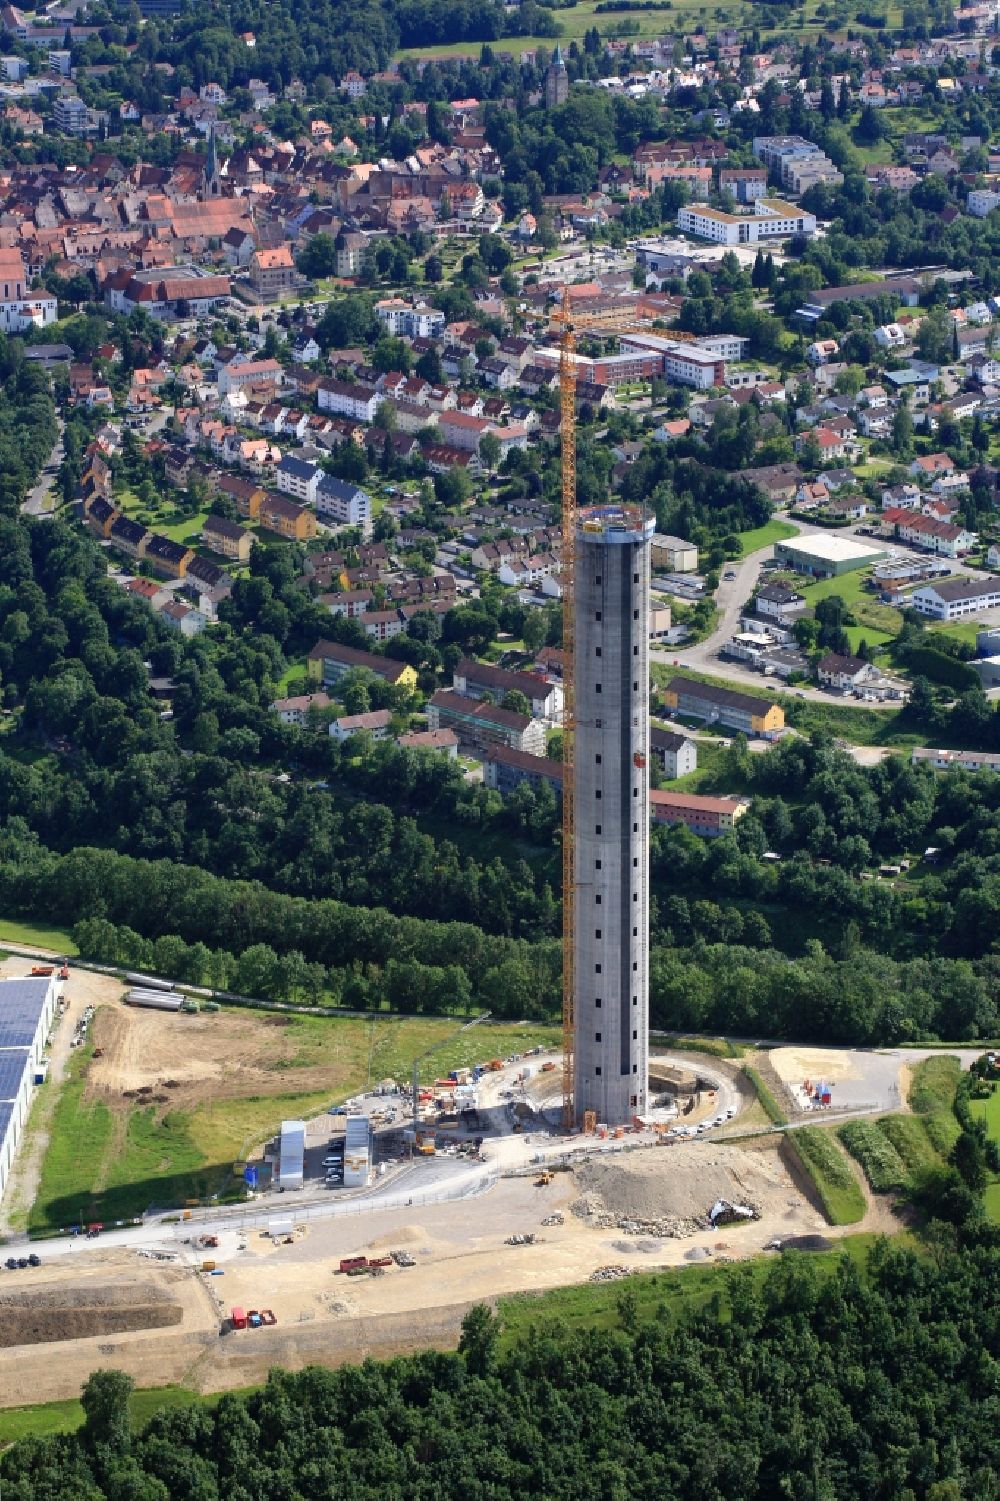 Rottweil from above - Construction and construction site of the ThyssenKrupp testing tower for Speed elevators in Rottweil in Baden - Wuerttemberg. When finished the new landmark of the town of Rottweil will be the tallest structure in Baden-Wuerttemberg